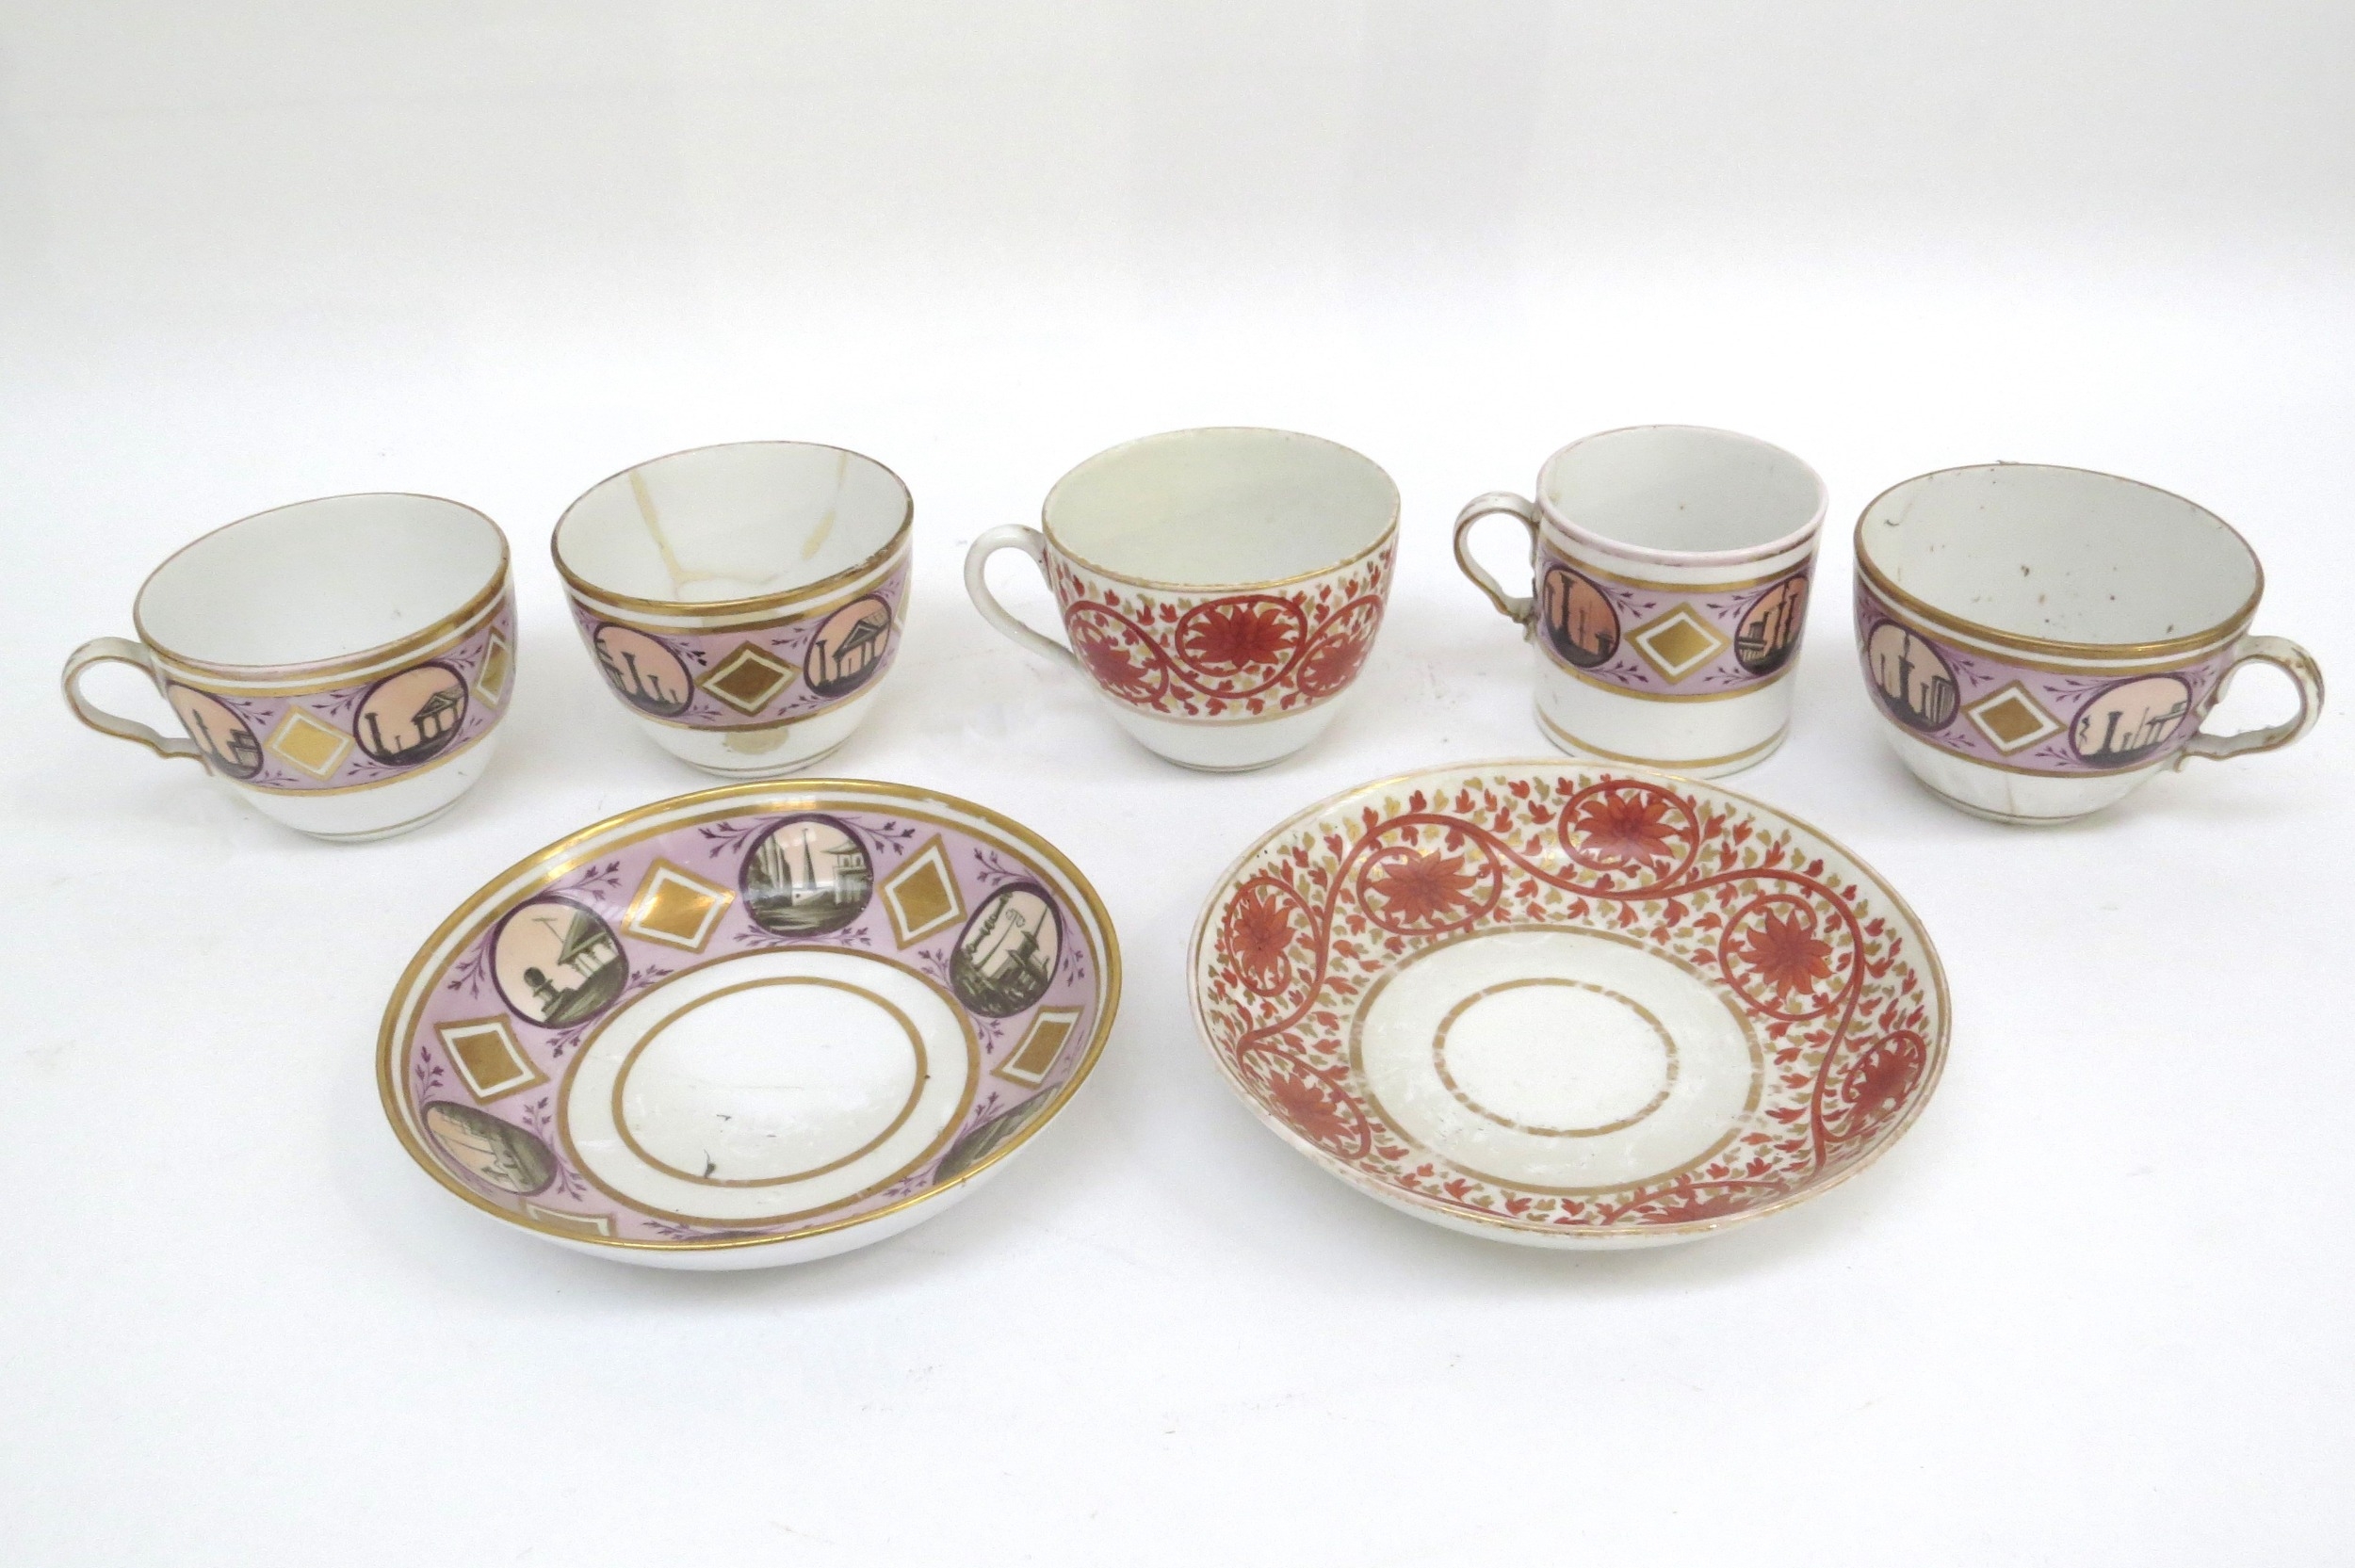 Mixed 19th Century ceramics including staple repaired Derby pot, teacups and saucers, Spode egg cup, - Image 4 of 7